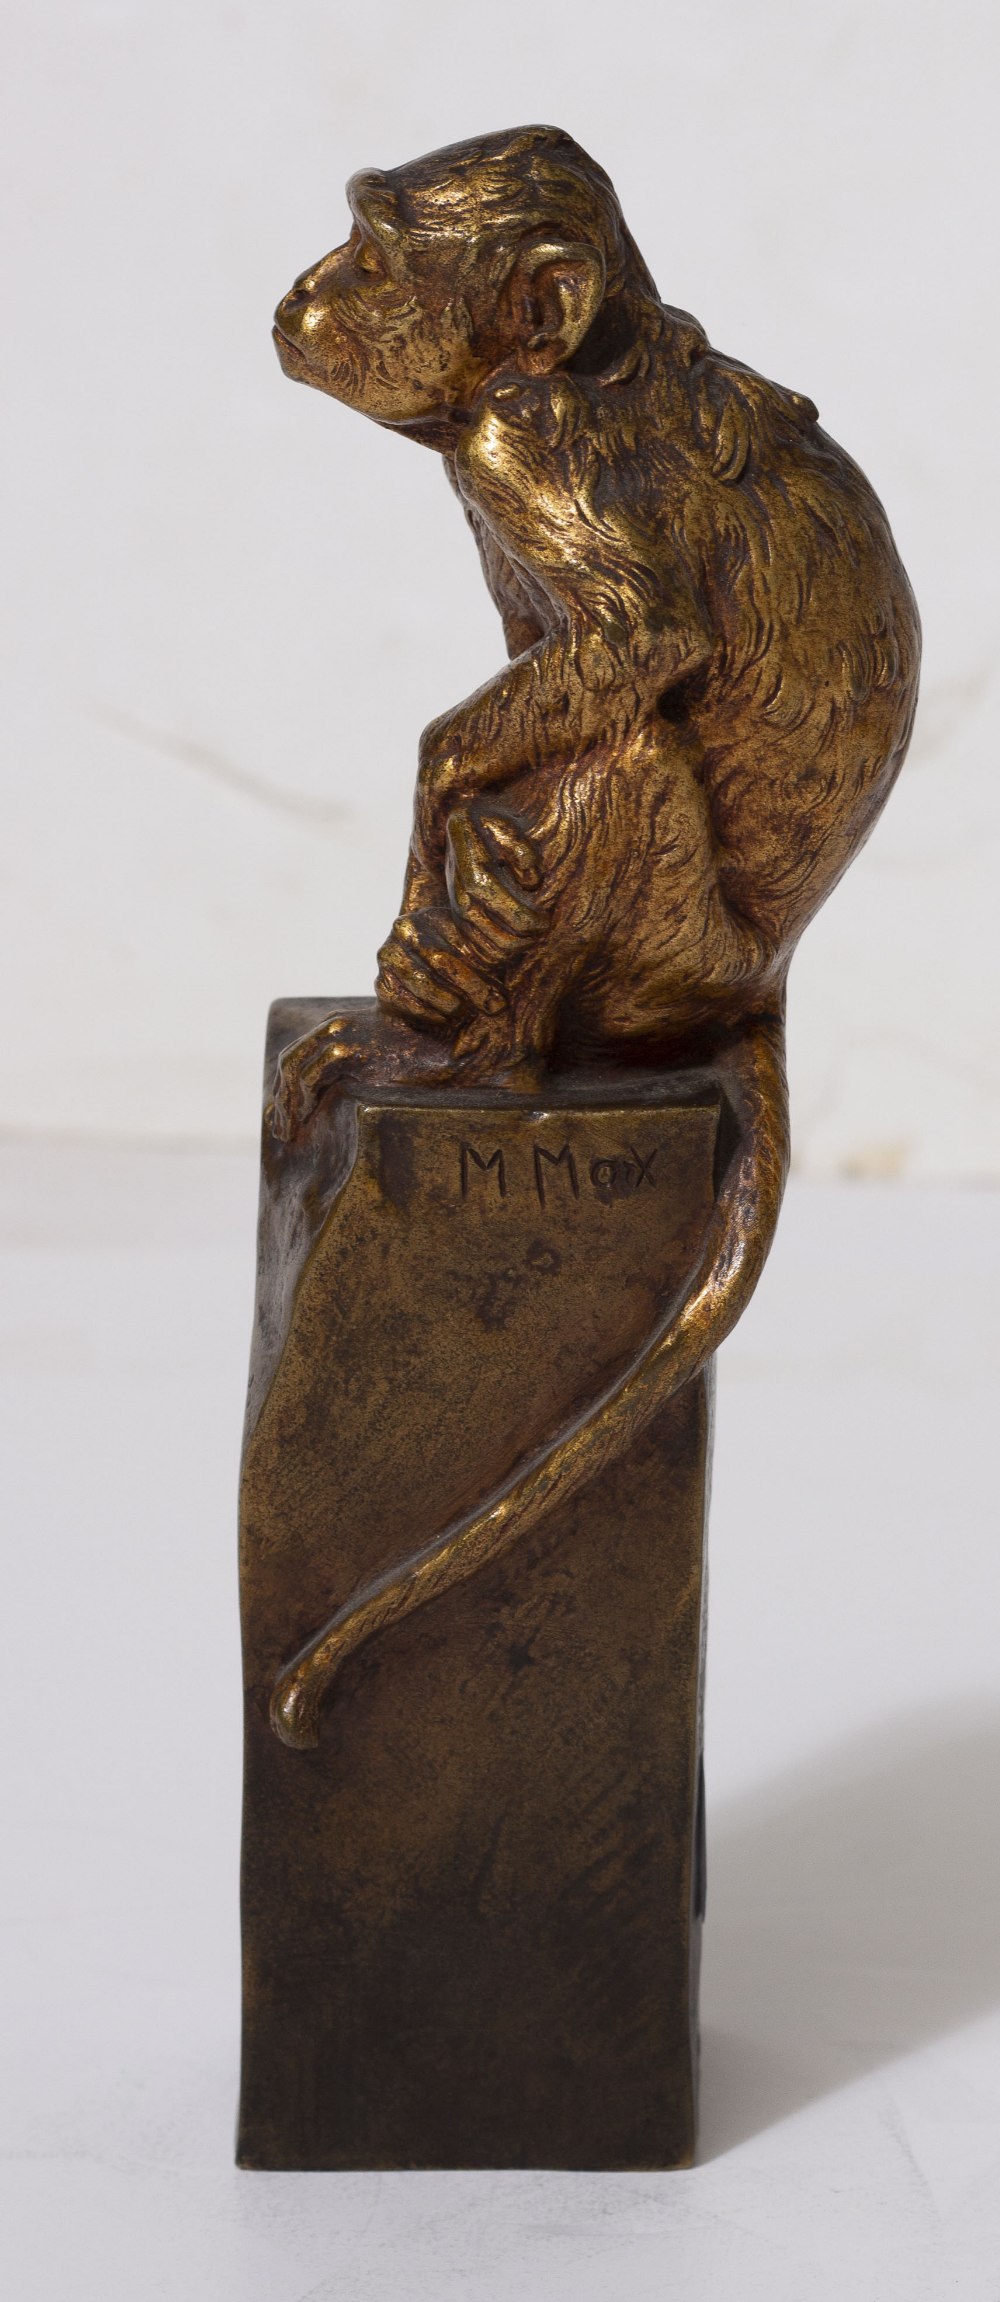 A BRASS CROUCHING MONKEY on a plinth, signed 'M Max' to side and '23v' to back, 24.5cm high - Image 6 of 7